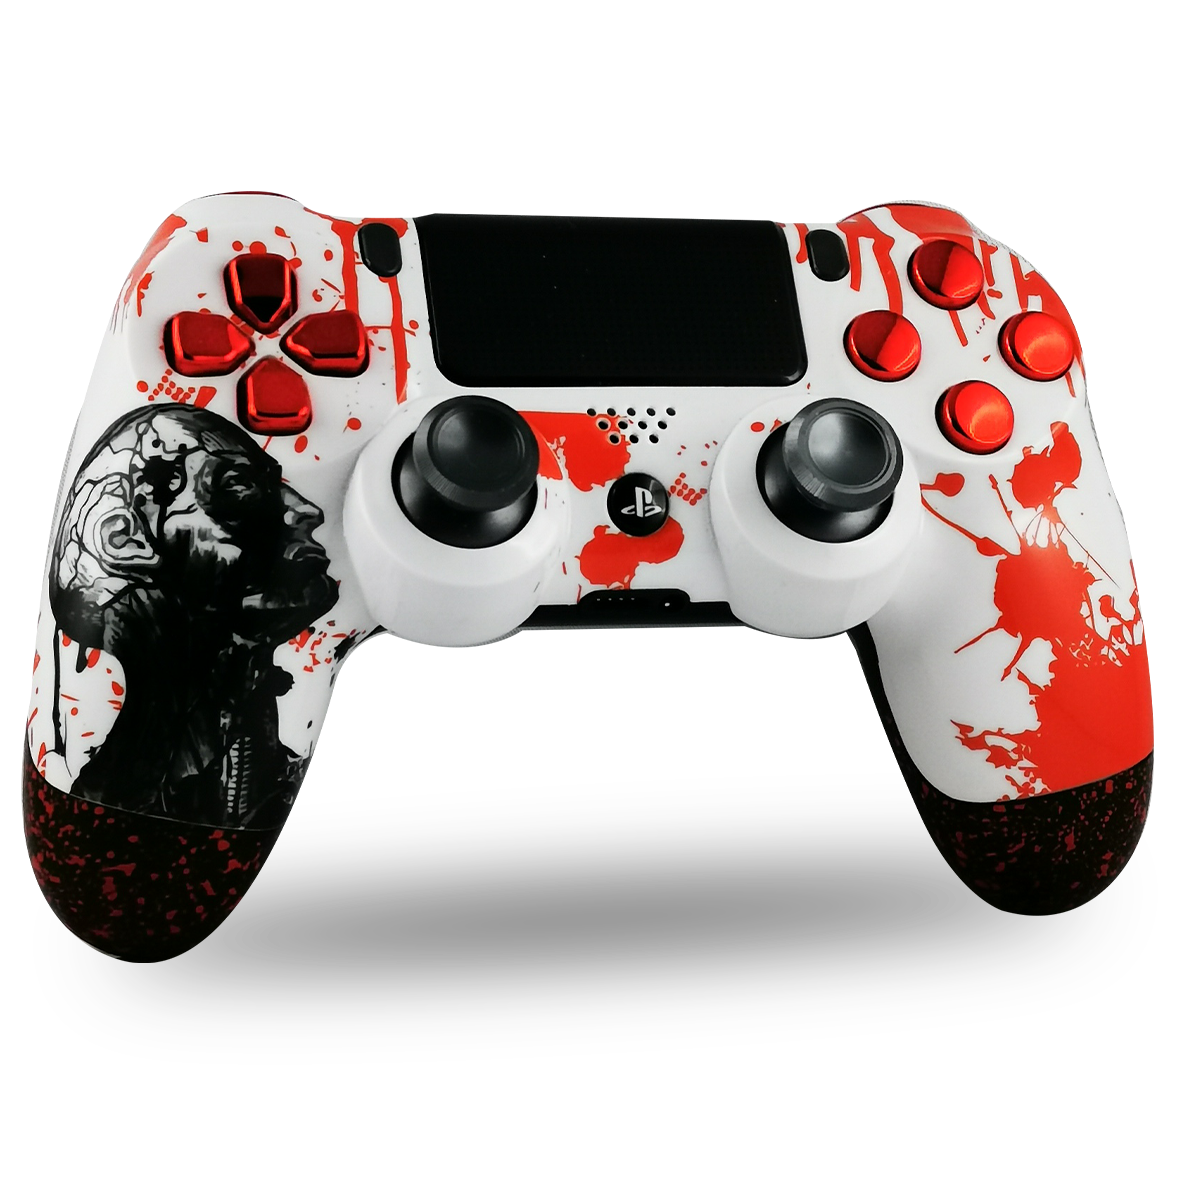 manette-PS4-custom-playstation-4-sony-personnalisee-drawmypad-inconnu22